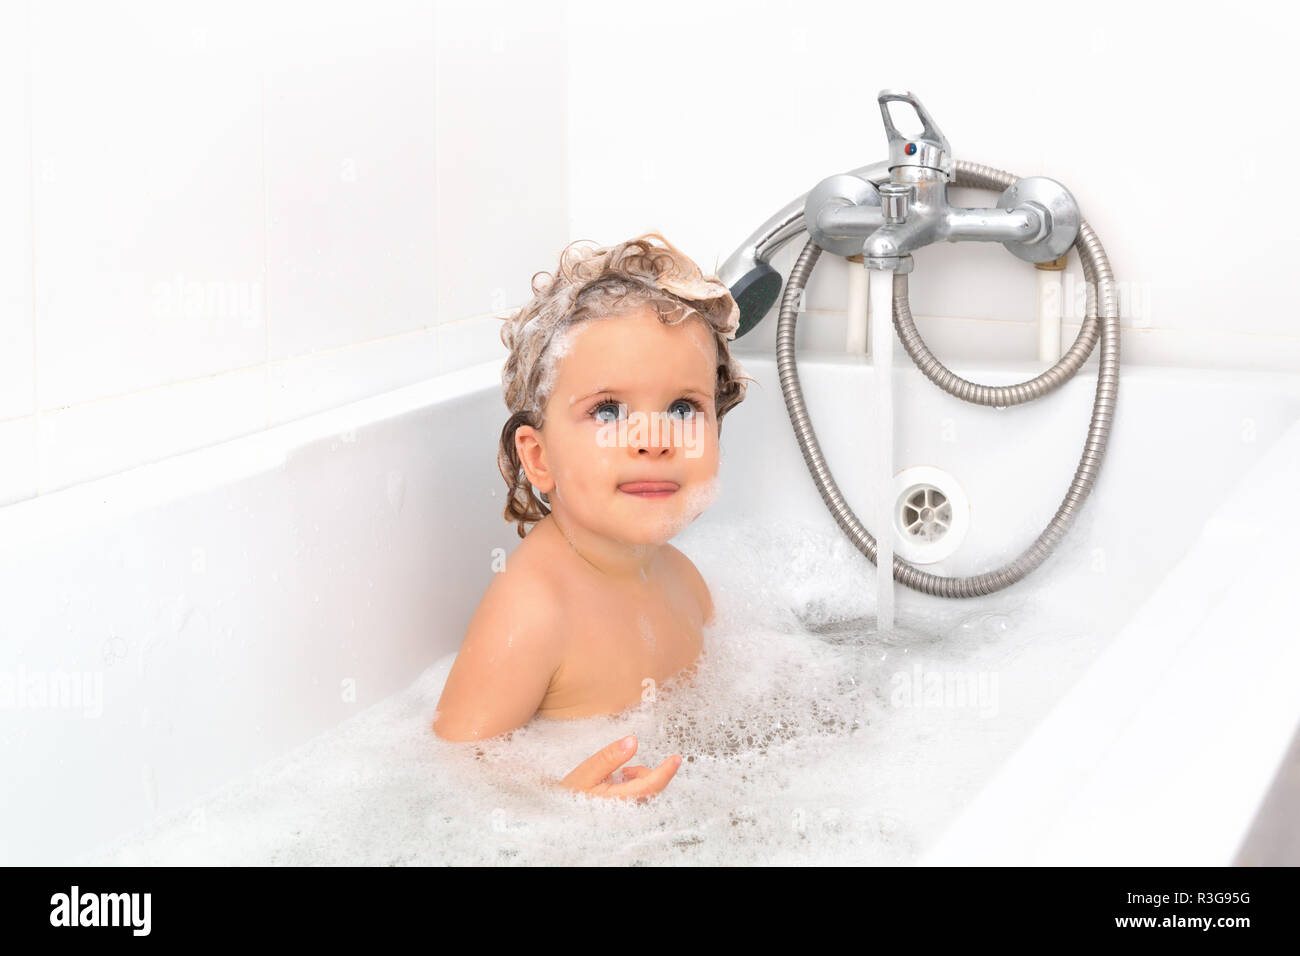 A little girl is bathing in the bathroom with foam. Adorable baby girl with soap suds on hair taking bath. Closeup portrait of smiling kid, health car Stock Photo